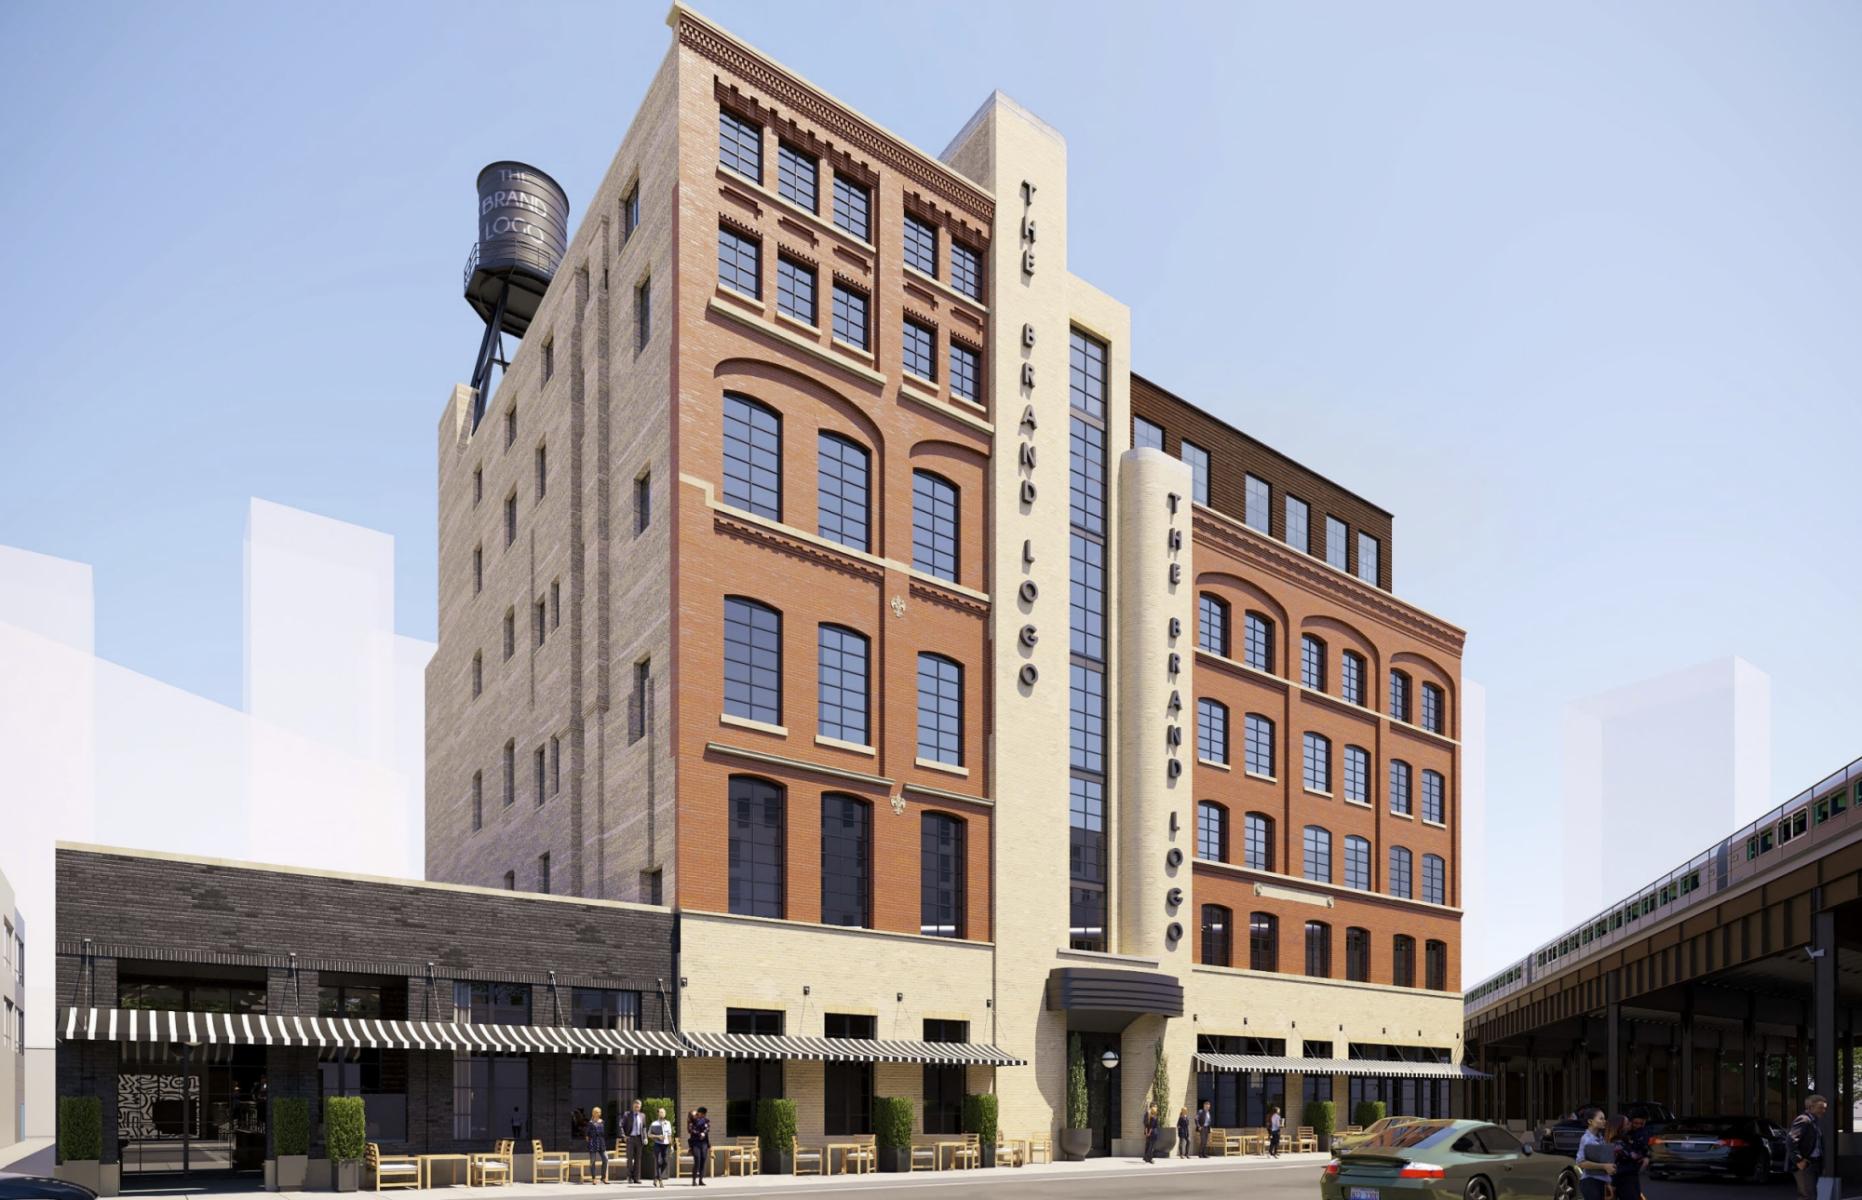 Salvation Army Building hotel and dining conversion